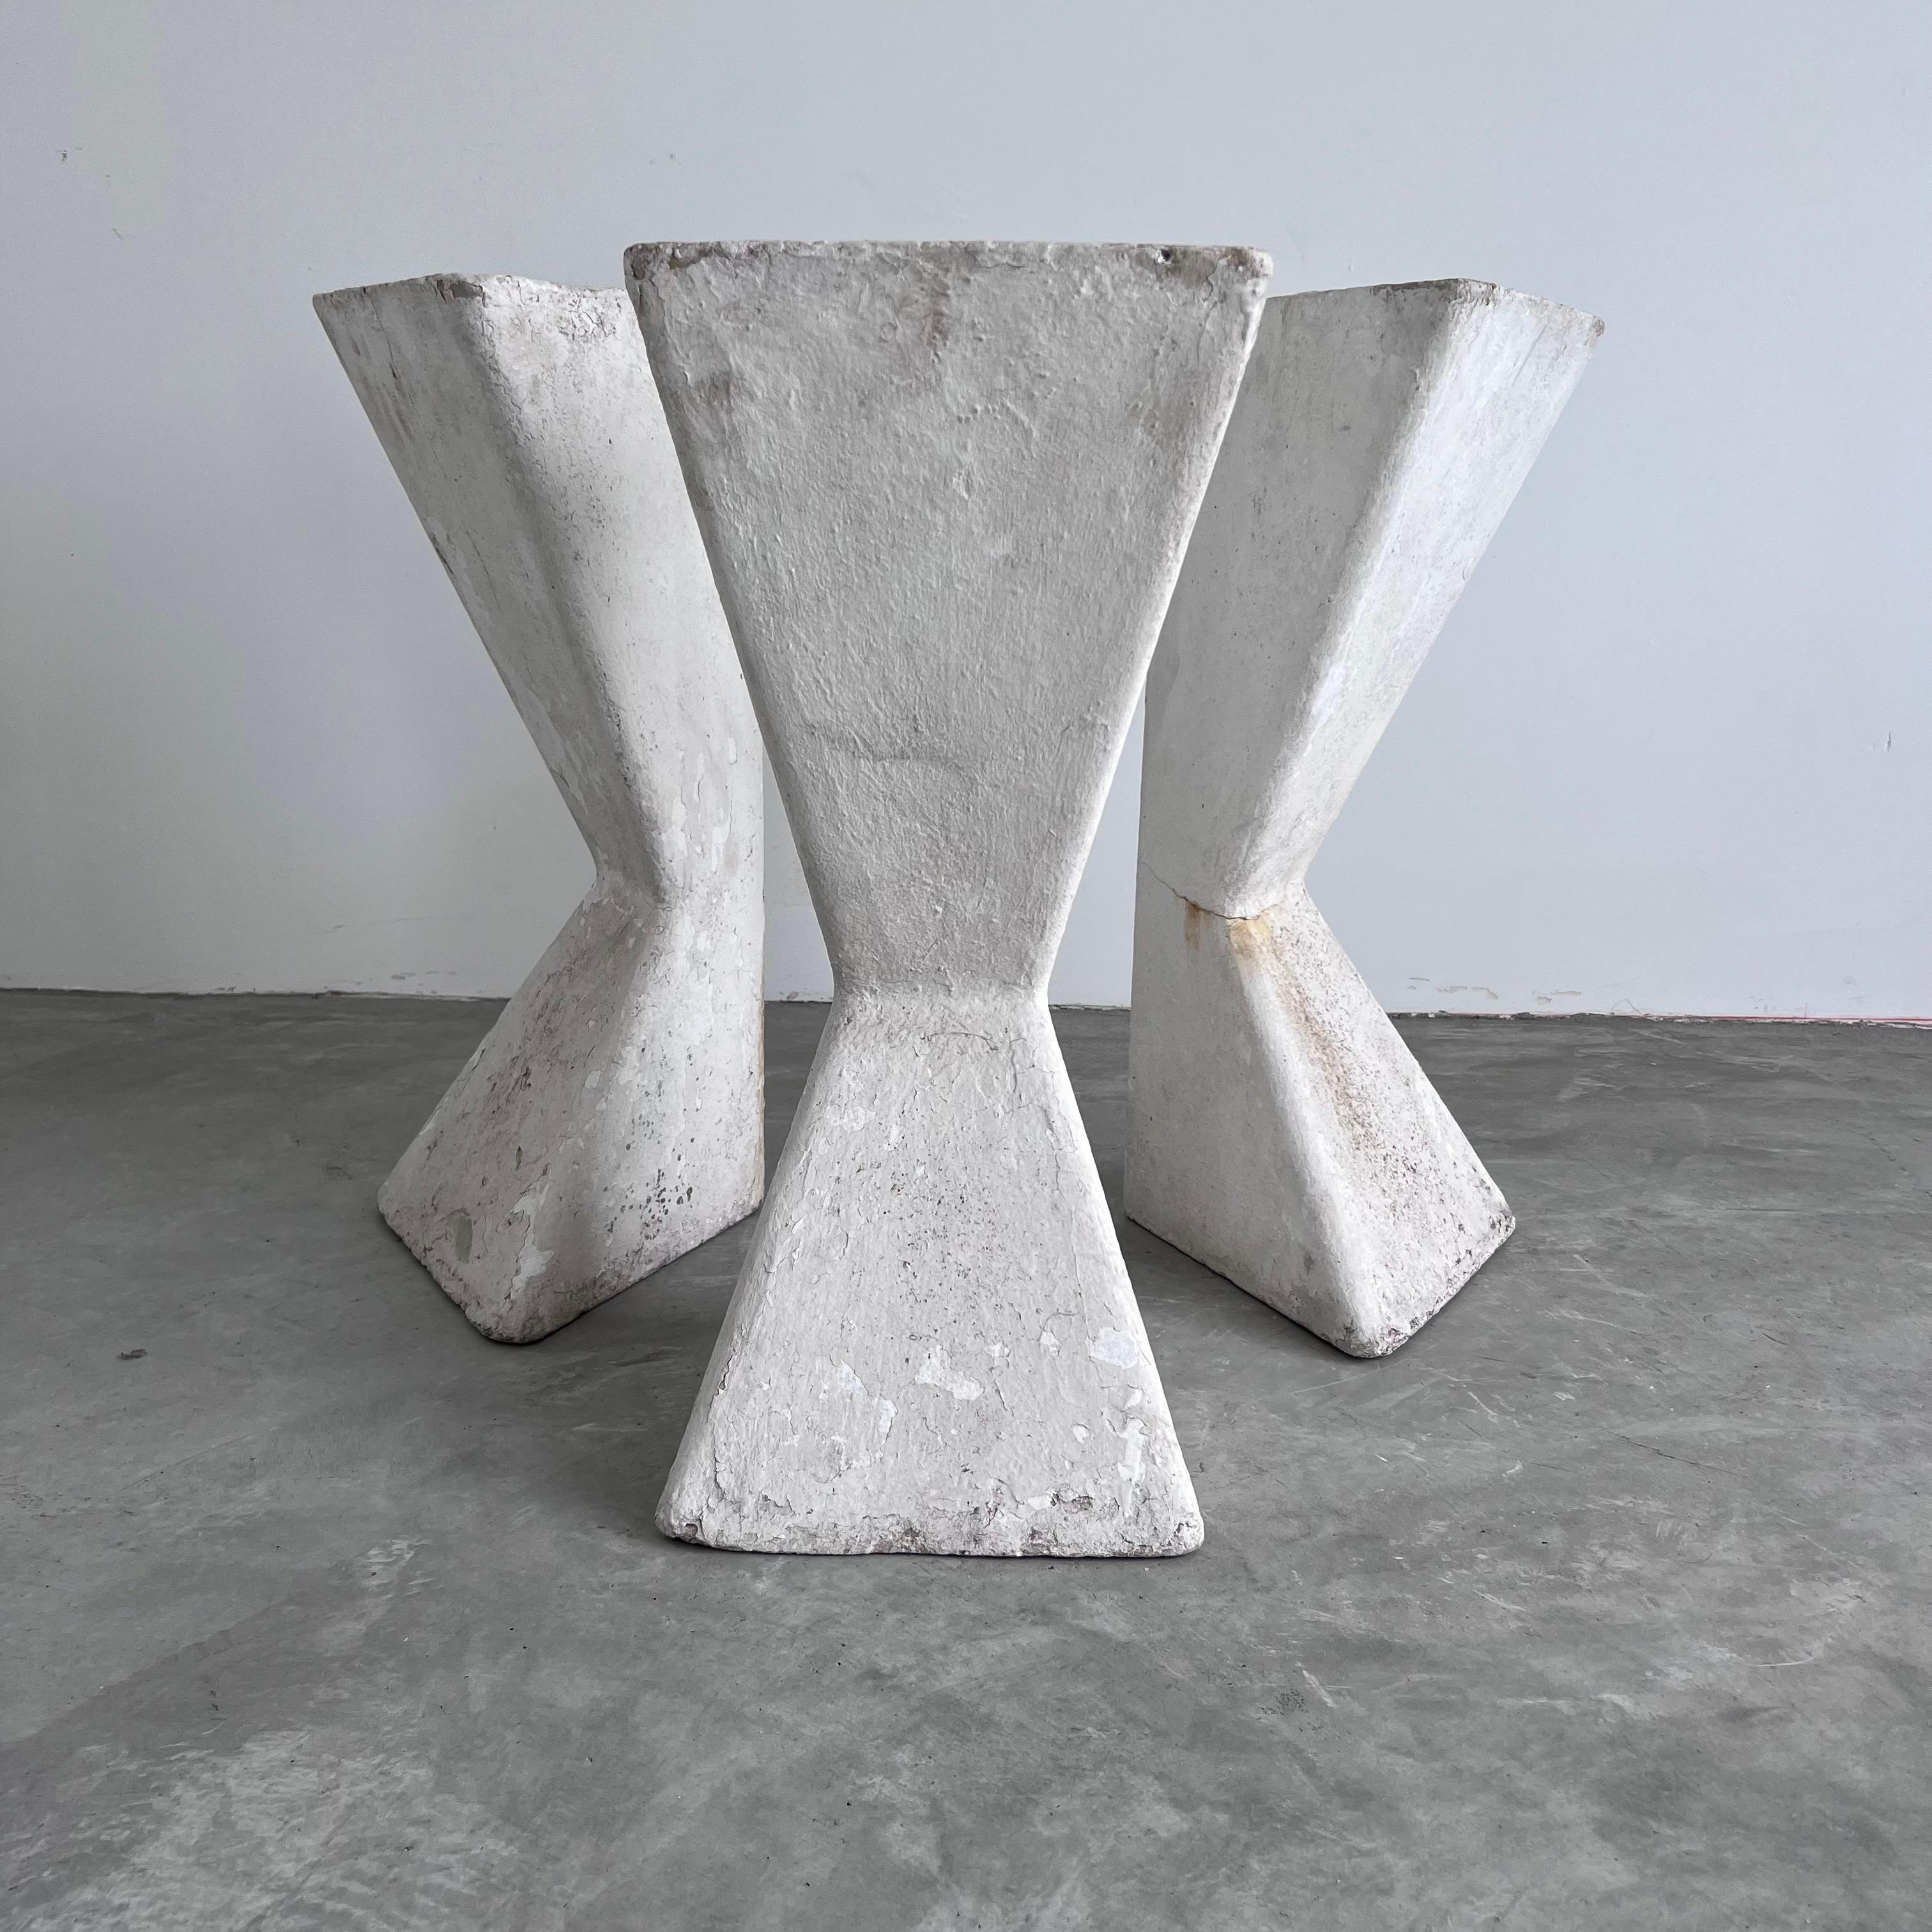 Set of 3 sculptural standing triangular concrete planters by Swiss Architect Willy Guhl. Can be placed upside down or right side. up. Each planter has a solid base to balance the weight of the planter and allow for the unique design of the planter.